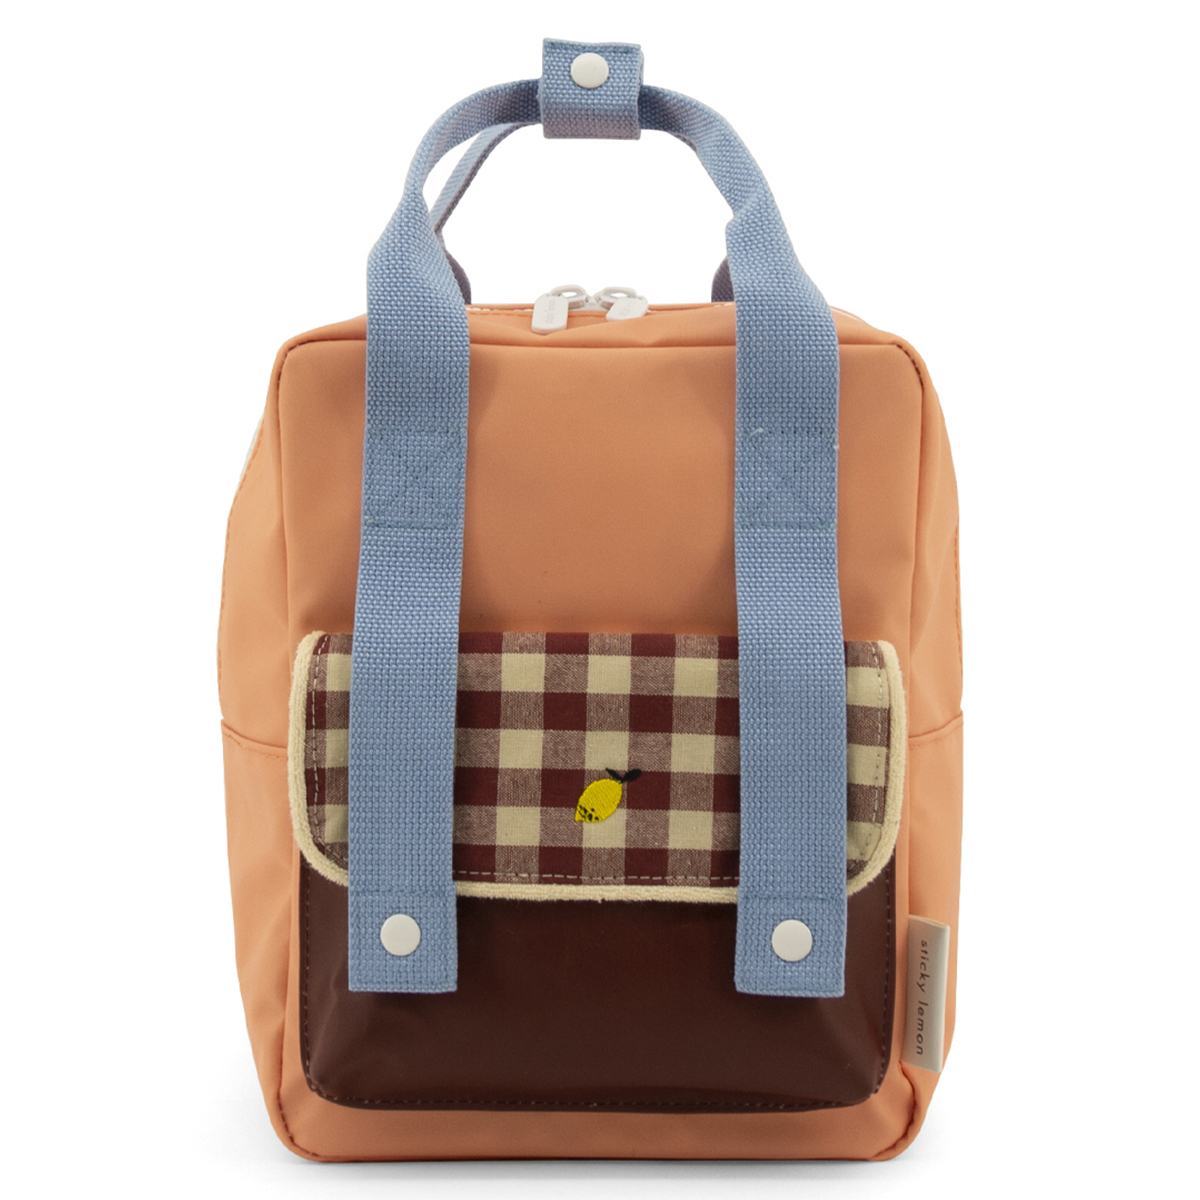 Bagagerie enfant Sac à Dos - Gingham Cherry Red Sac à Dos - Gingham Cherry Red